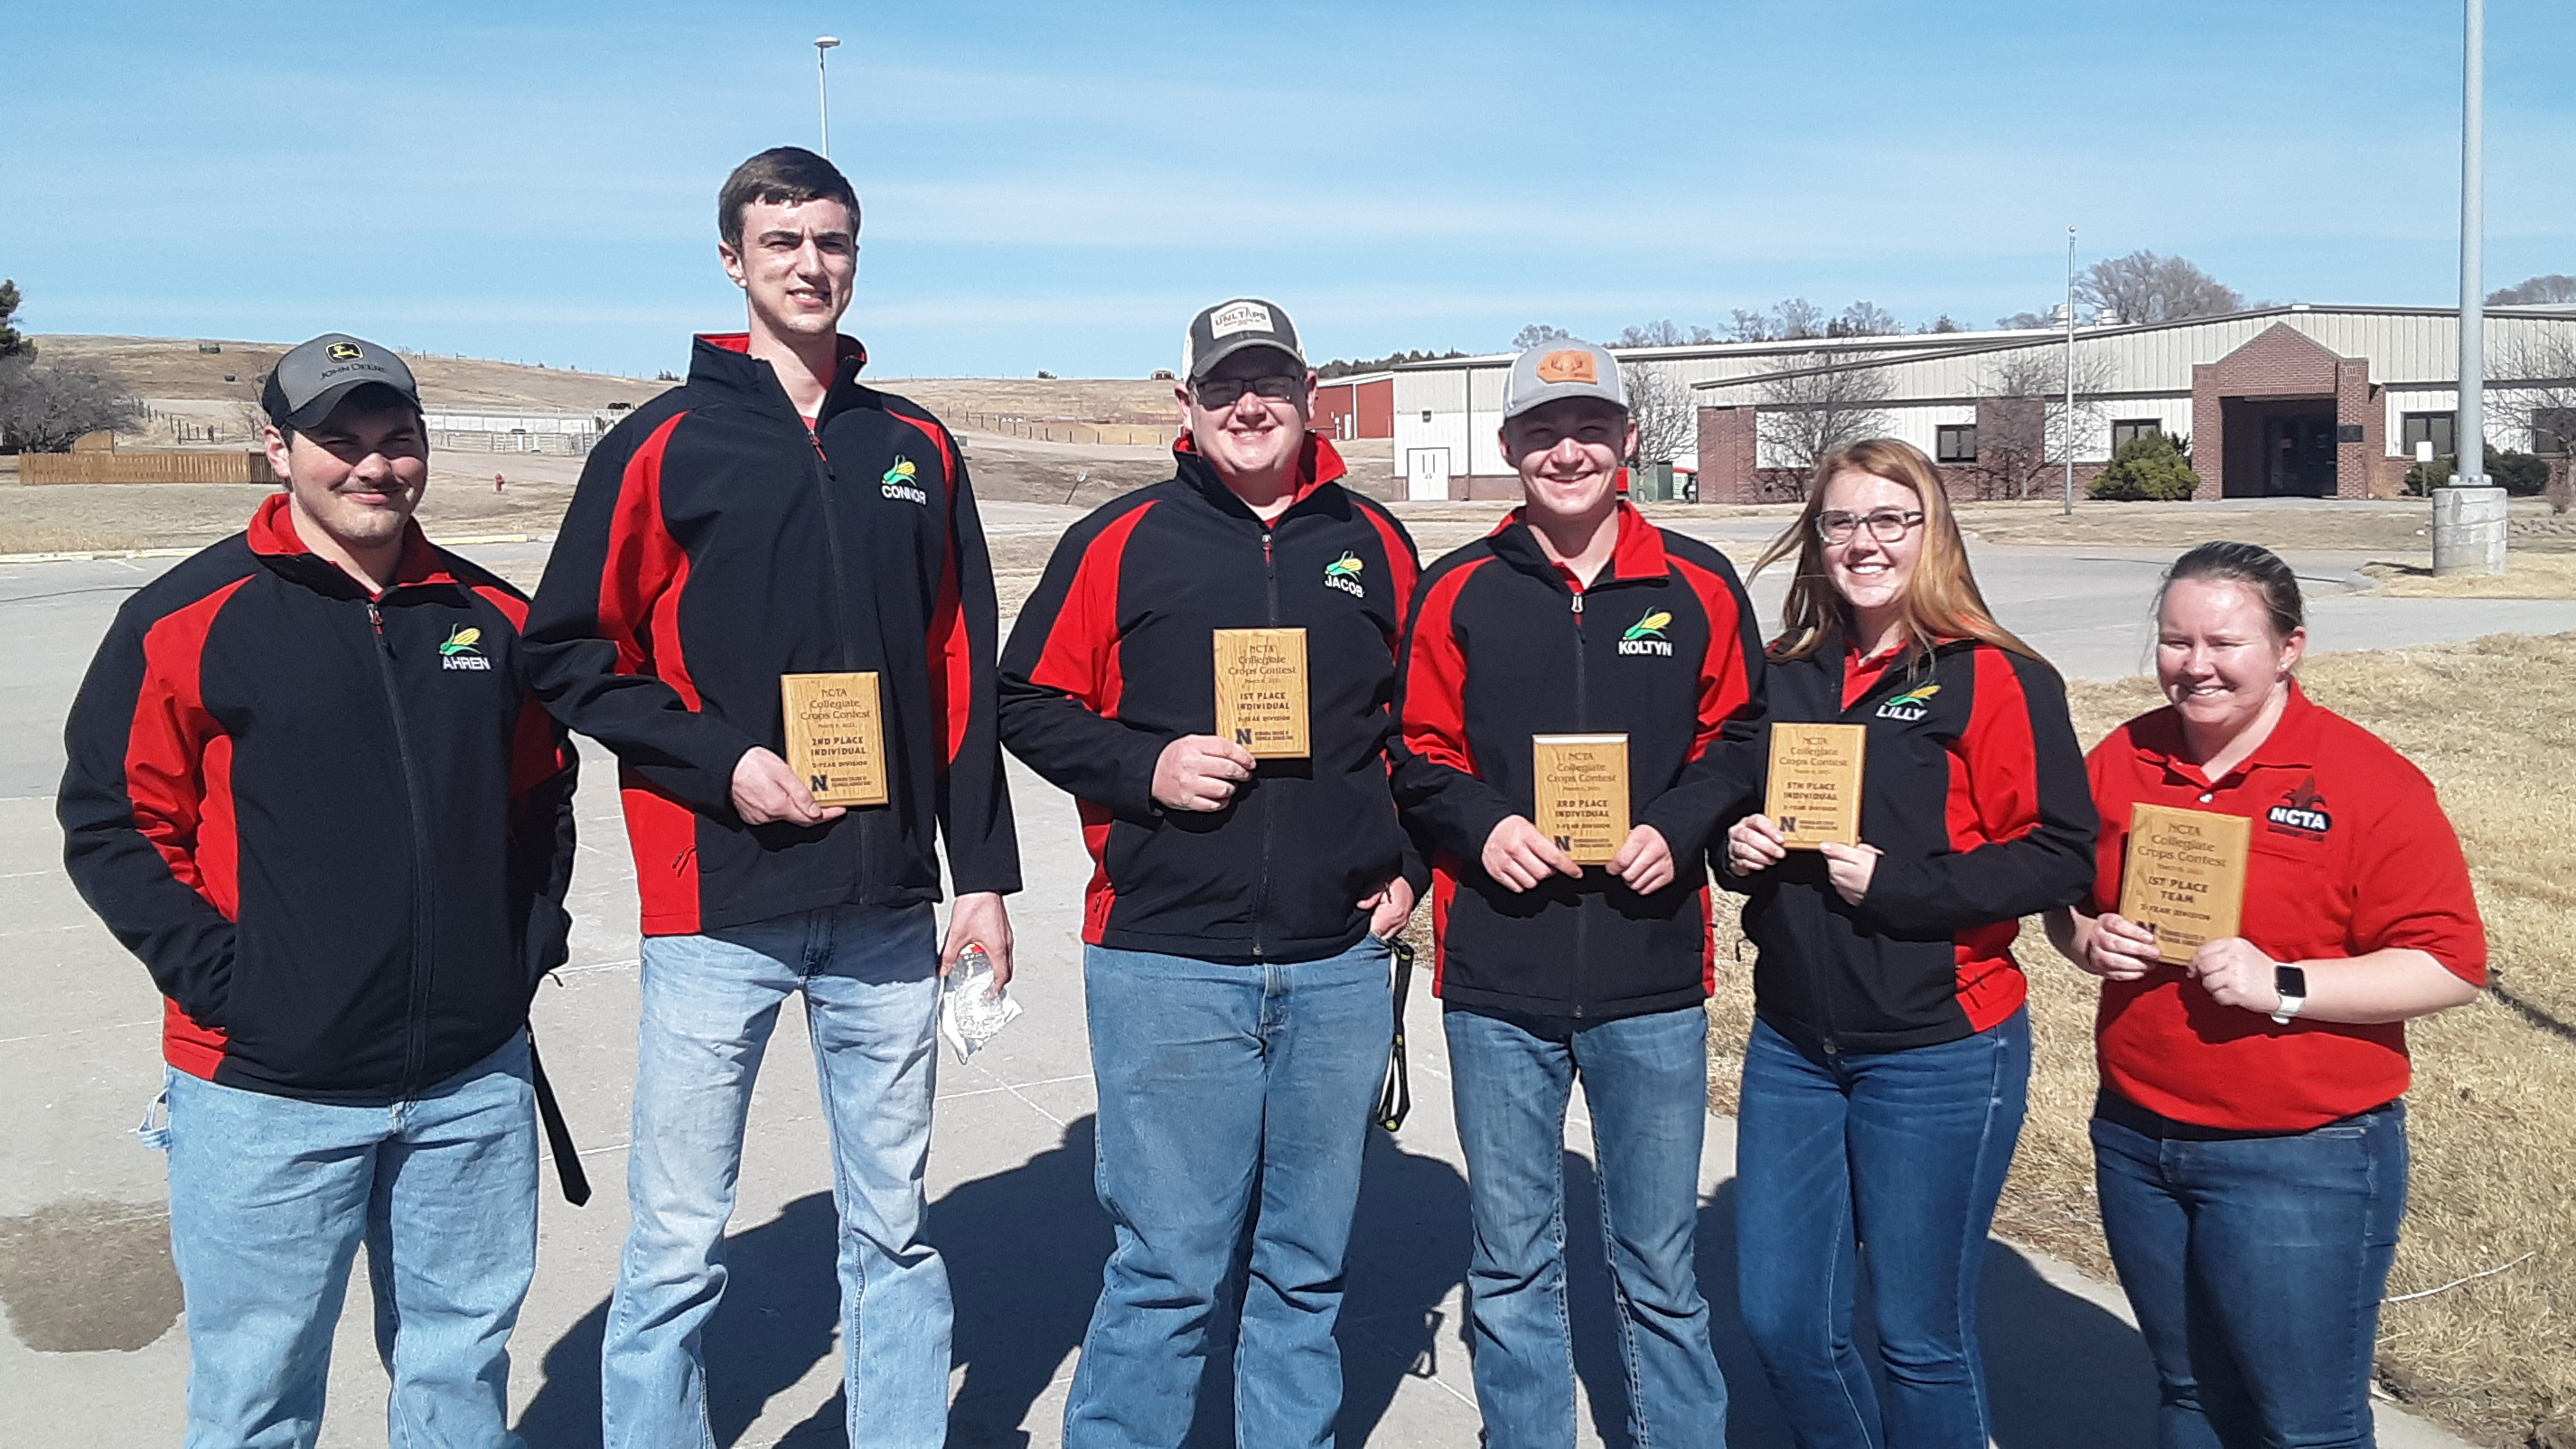 Aggie Crops Judging students who competed in a March contest at the Nebraska College of Technical Agriculture are, from left, Ahren Marburger of Malvern, Iowa; Connor Nolan, Lynch; Jacob Jenkins, Mitchell; Koltyn Forbes, Wood River; Lilly Calkins, Palmyra; and Allison Wilkens, Gibbon. The Aggie team won first place among 2-year schools. (Brad Ramsdale / NCTA Photo)